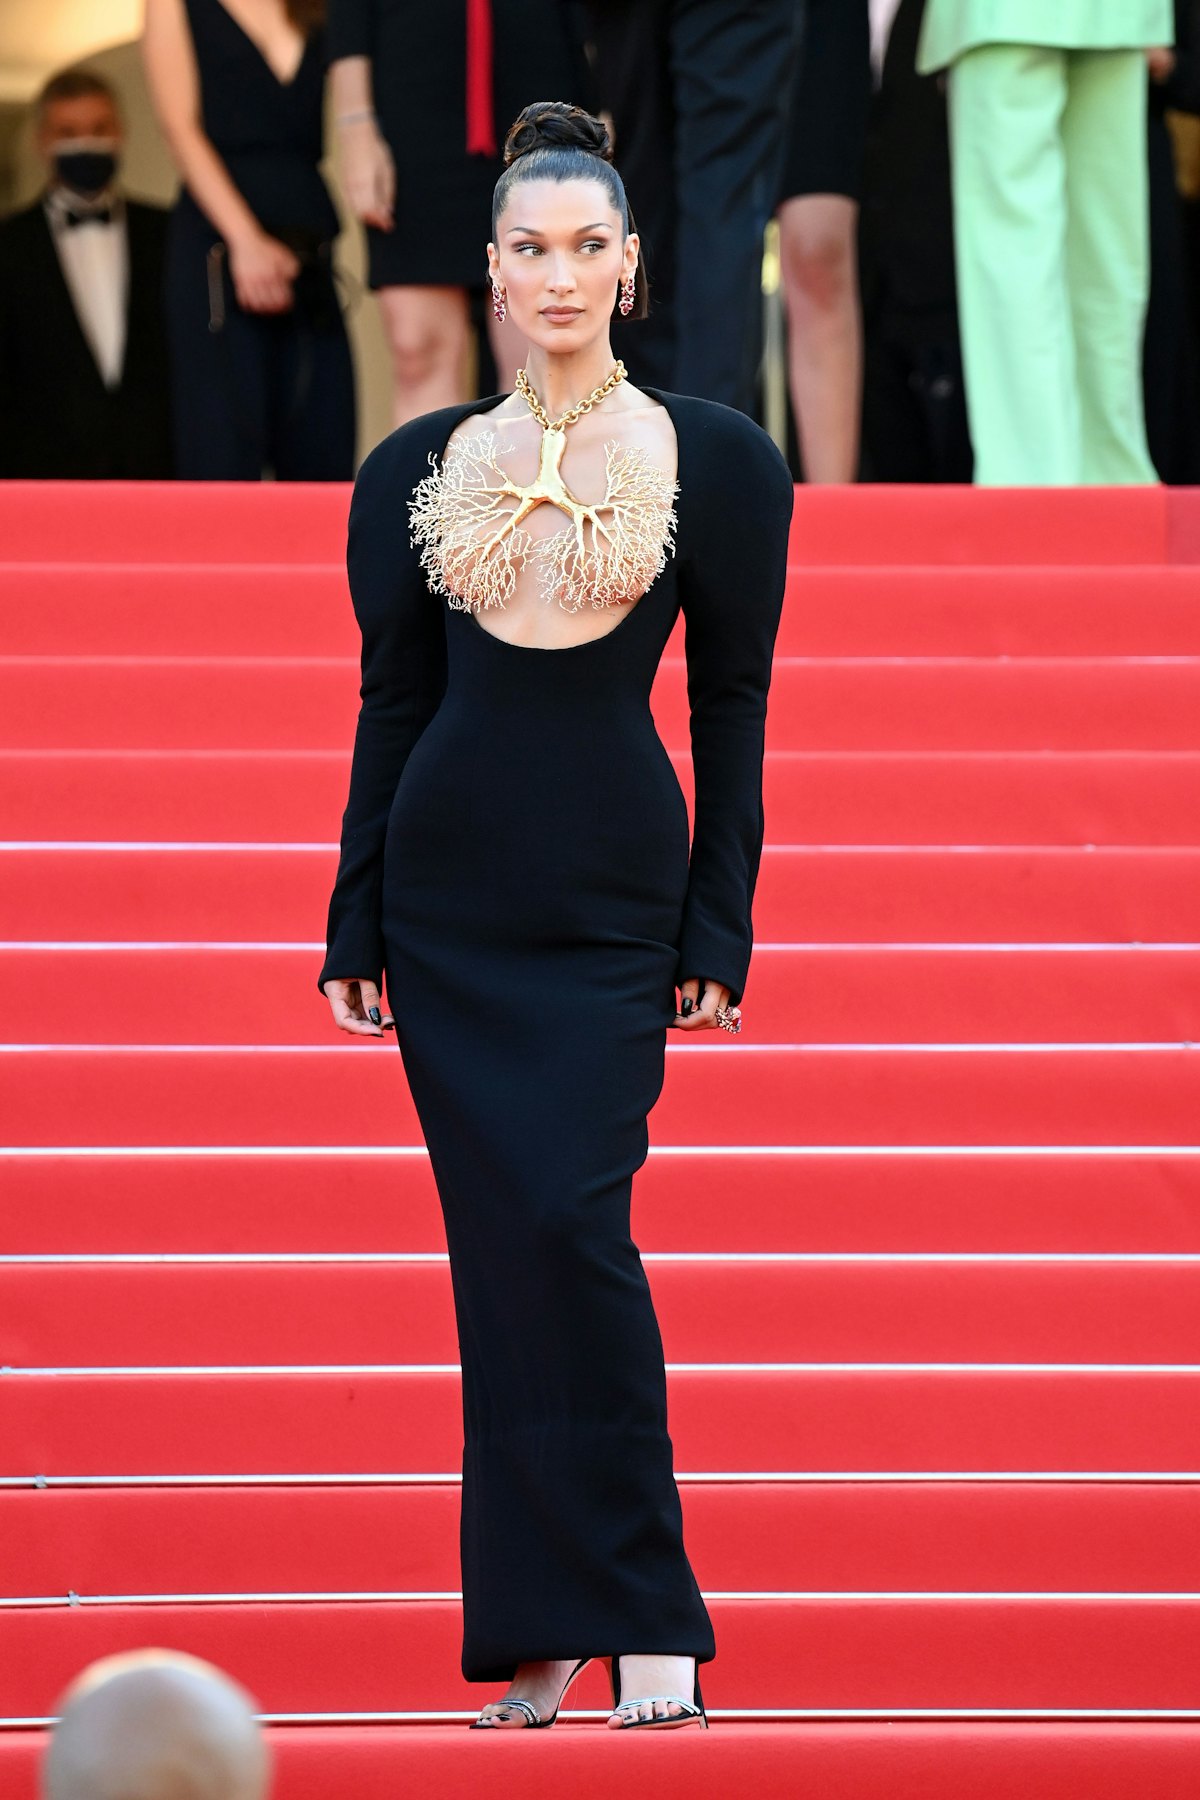 Cannes Film Festival Red Carpet 2021: See Everyone's Luxe Looks